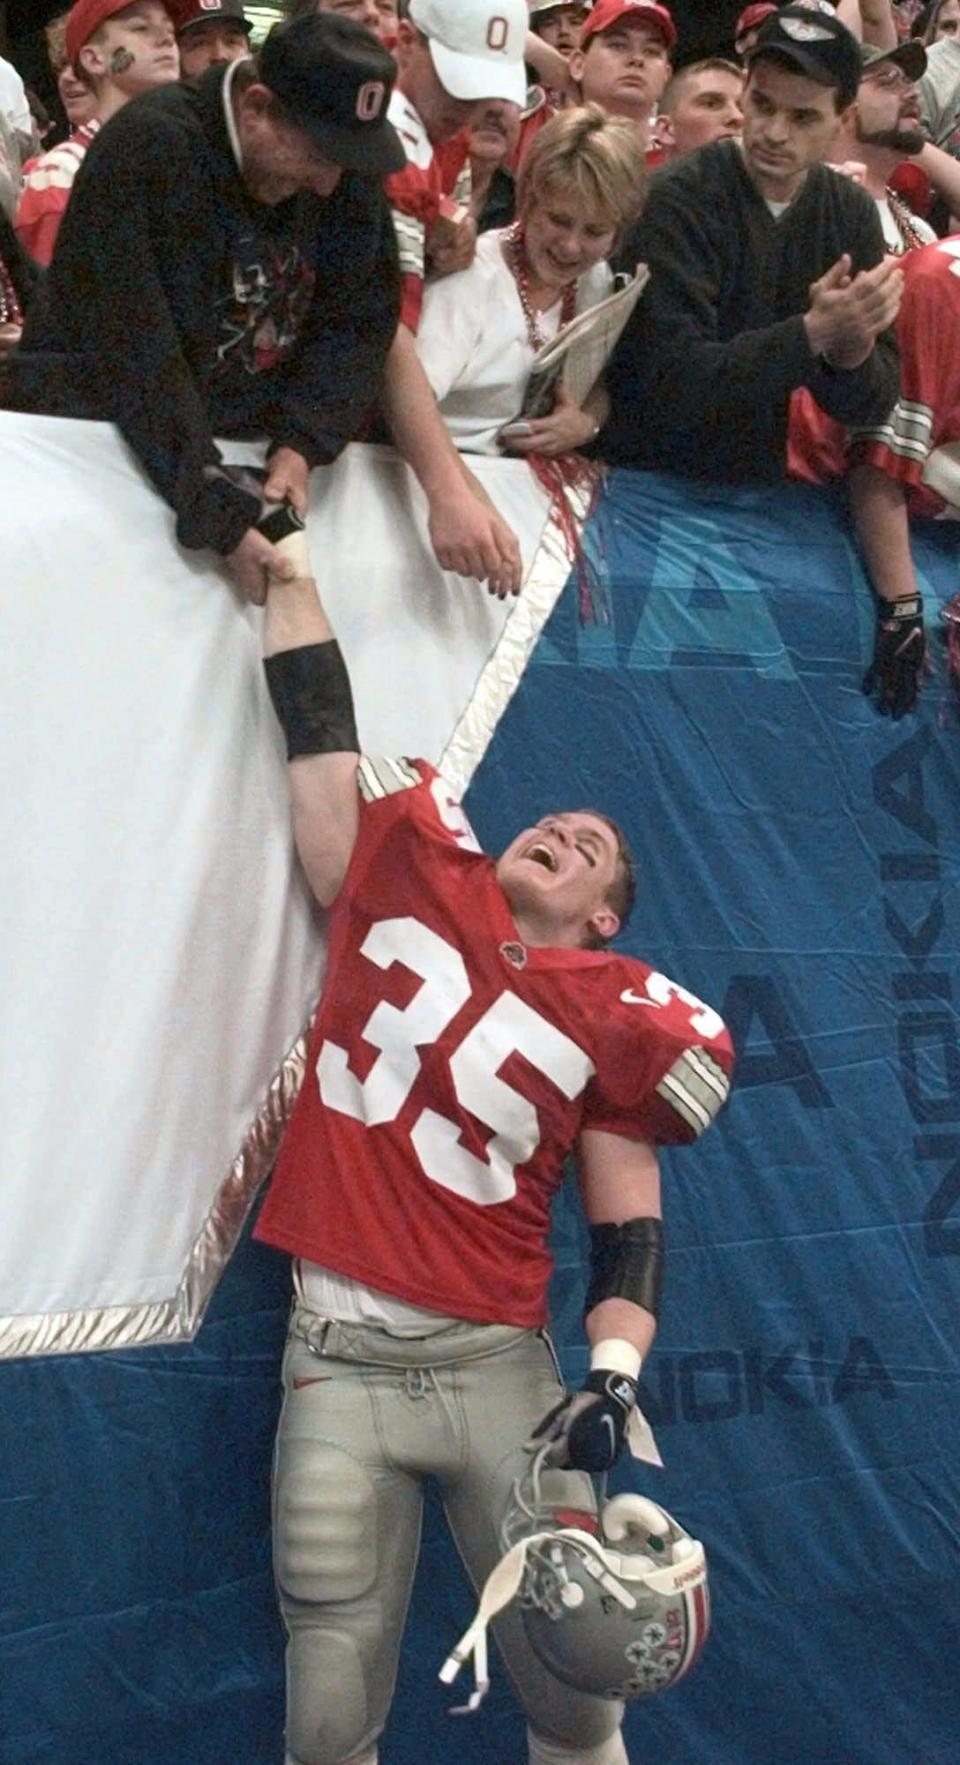 Ohio State linebacker Jerry Rudzinski celebrates with fans after the Buckeyes win over Texas A&M, 24-14, in the 1999 Sugar Bowl.